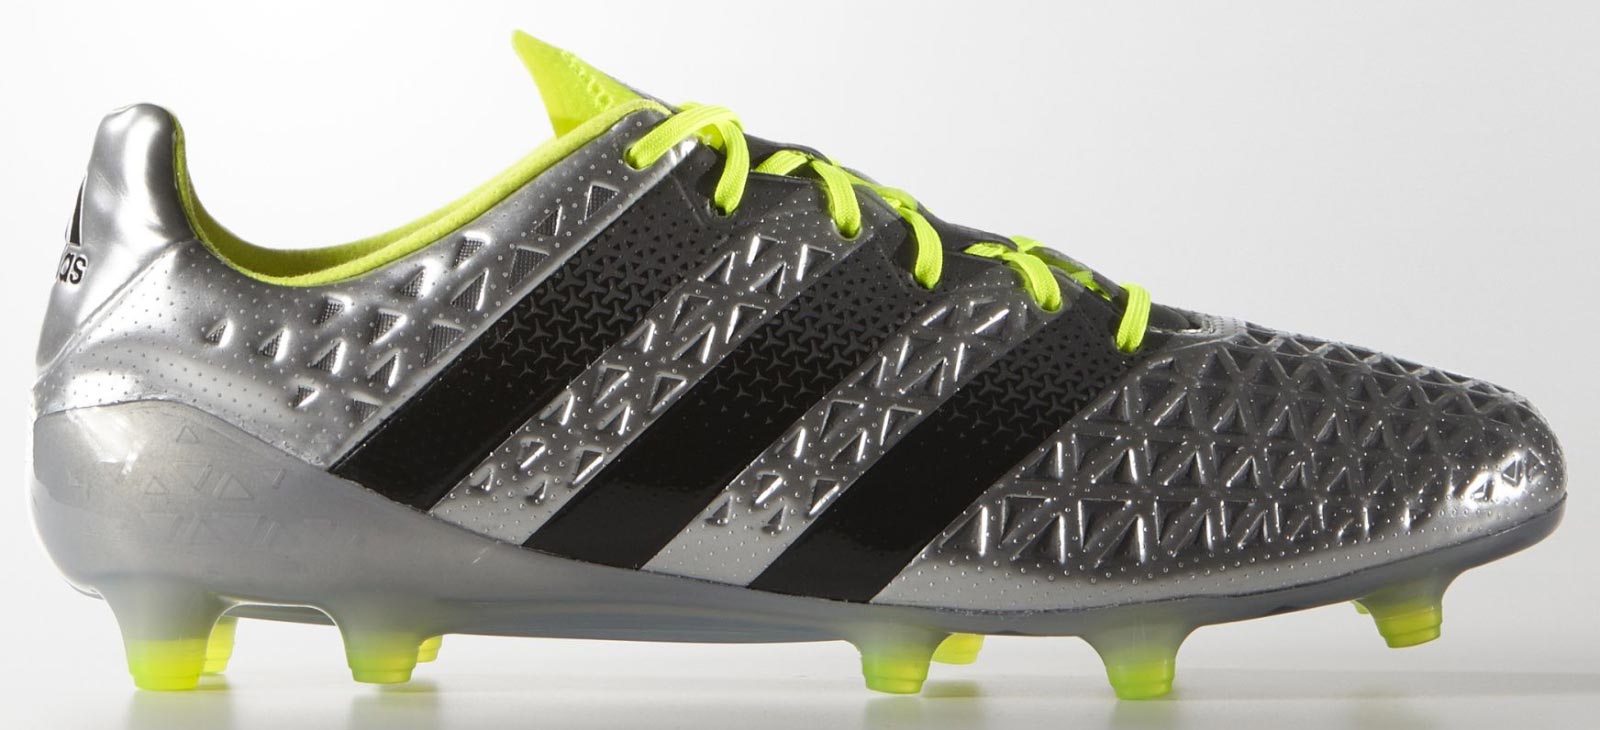 Adidas Ace Euro 16.1 2016 Released -